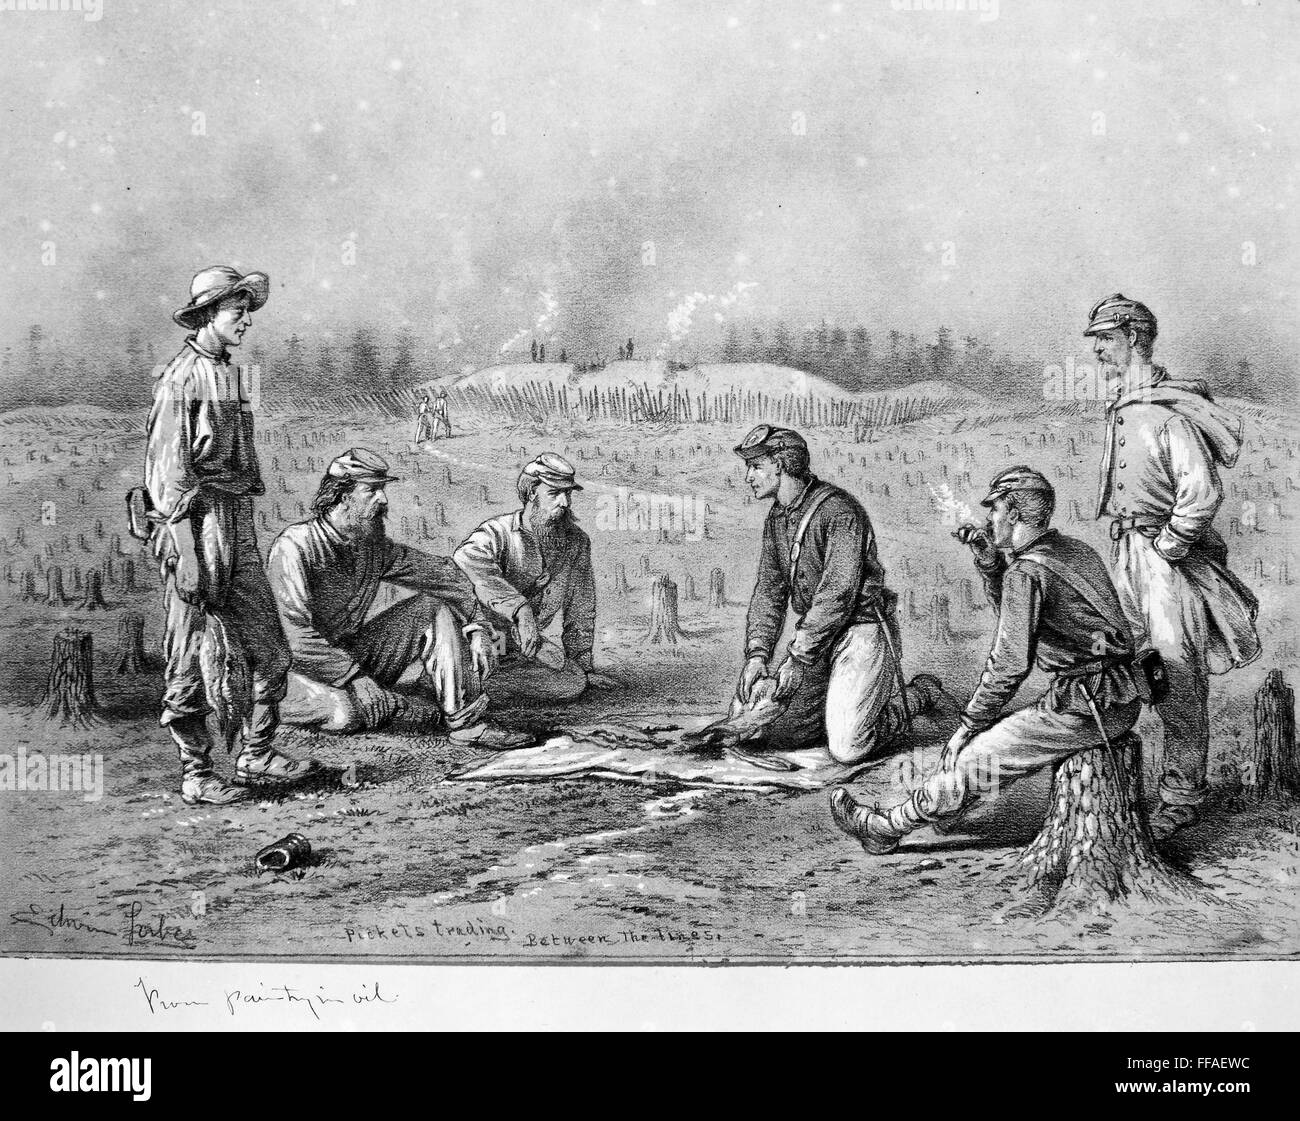 Civil War Soldiers Npickets Trading Between The Lines Pencil Drawing By Edwin Forbes 1839 